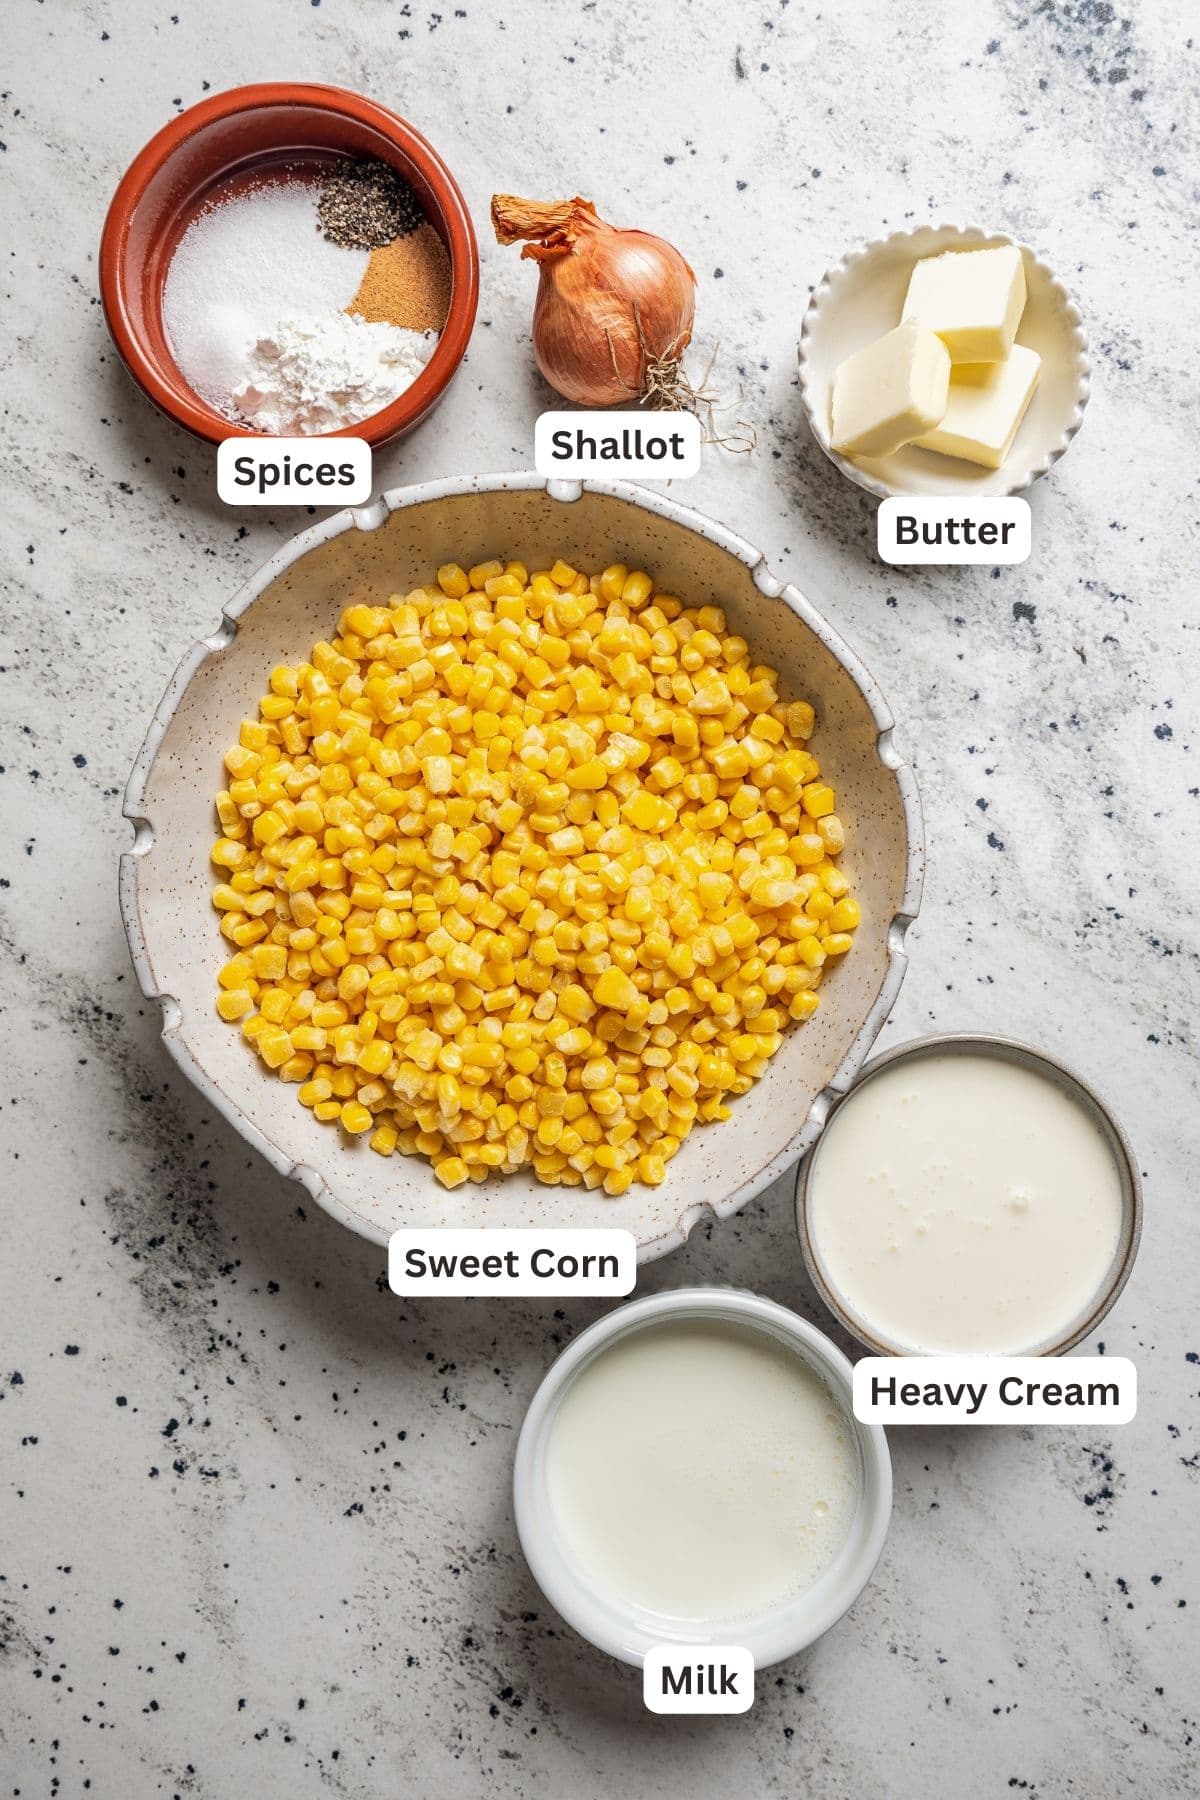 Labeled ingredients for creamed corn.